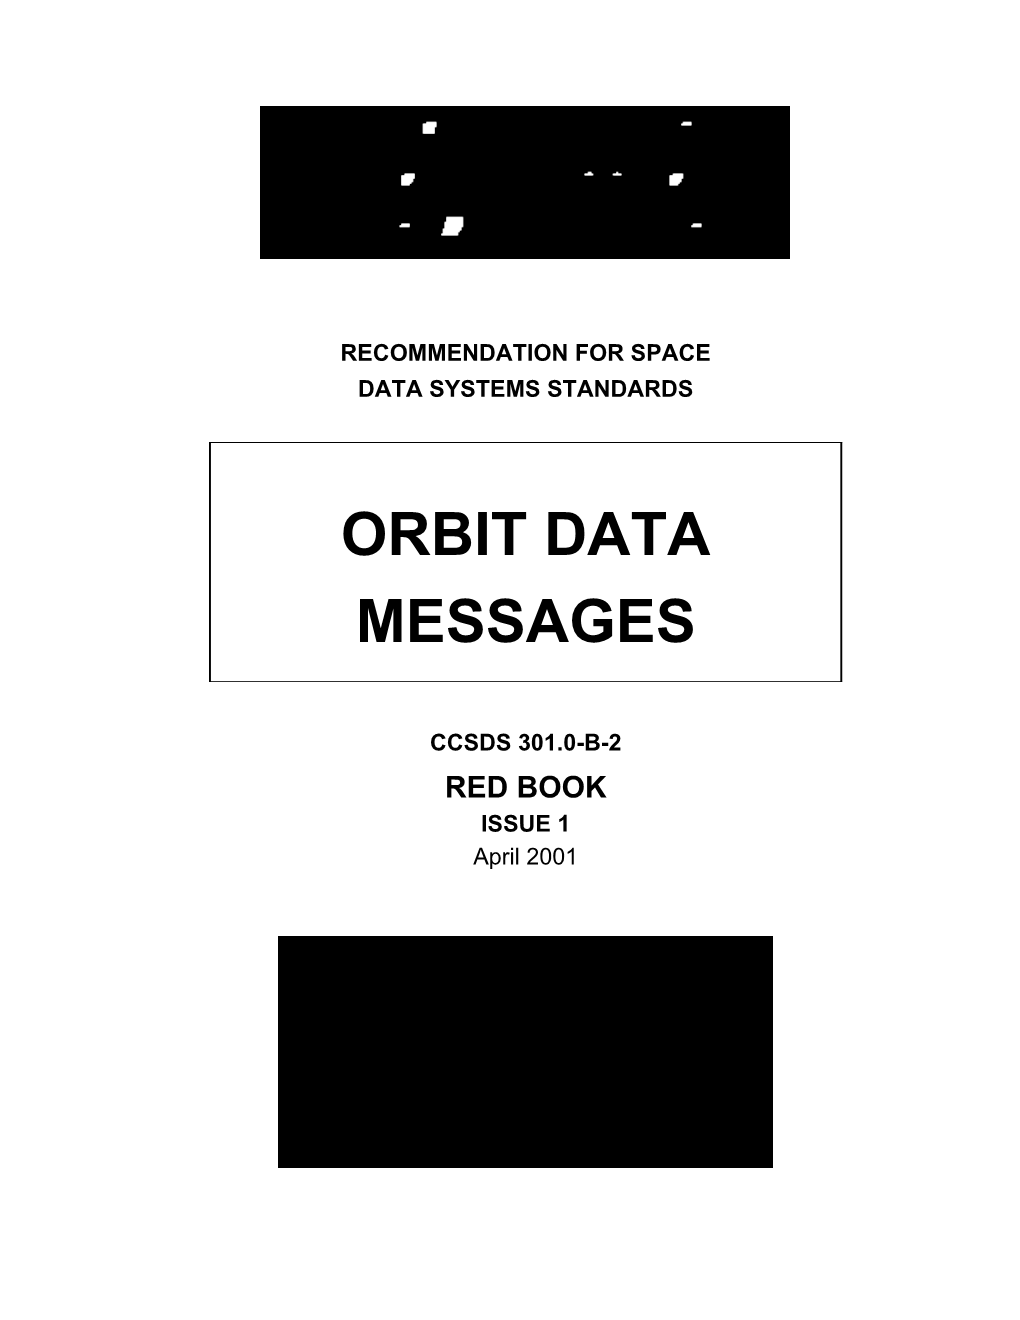 Recommendation for Space